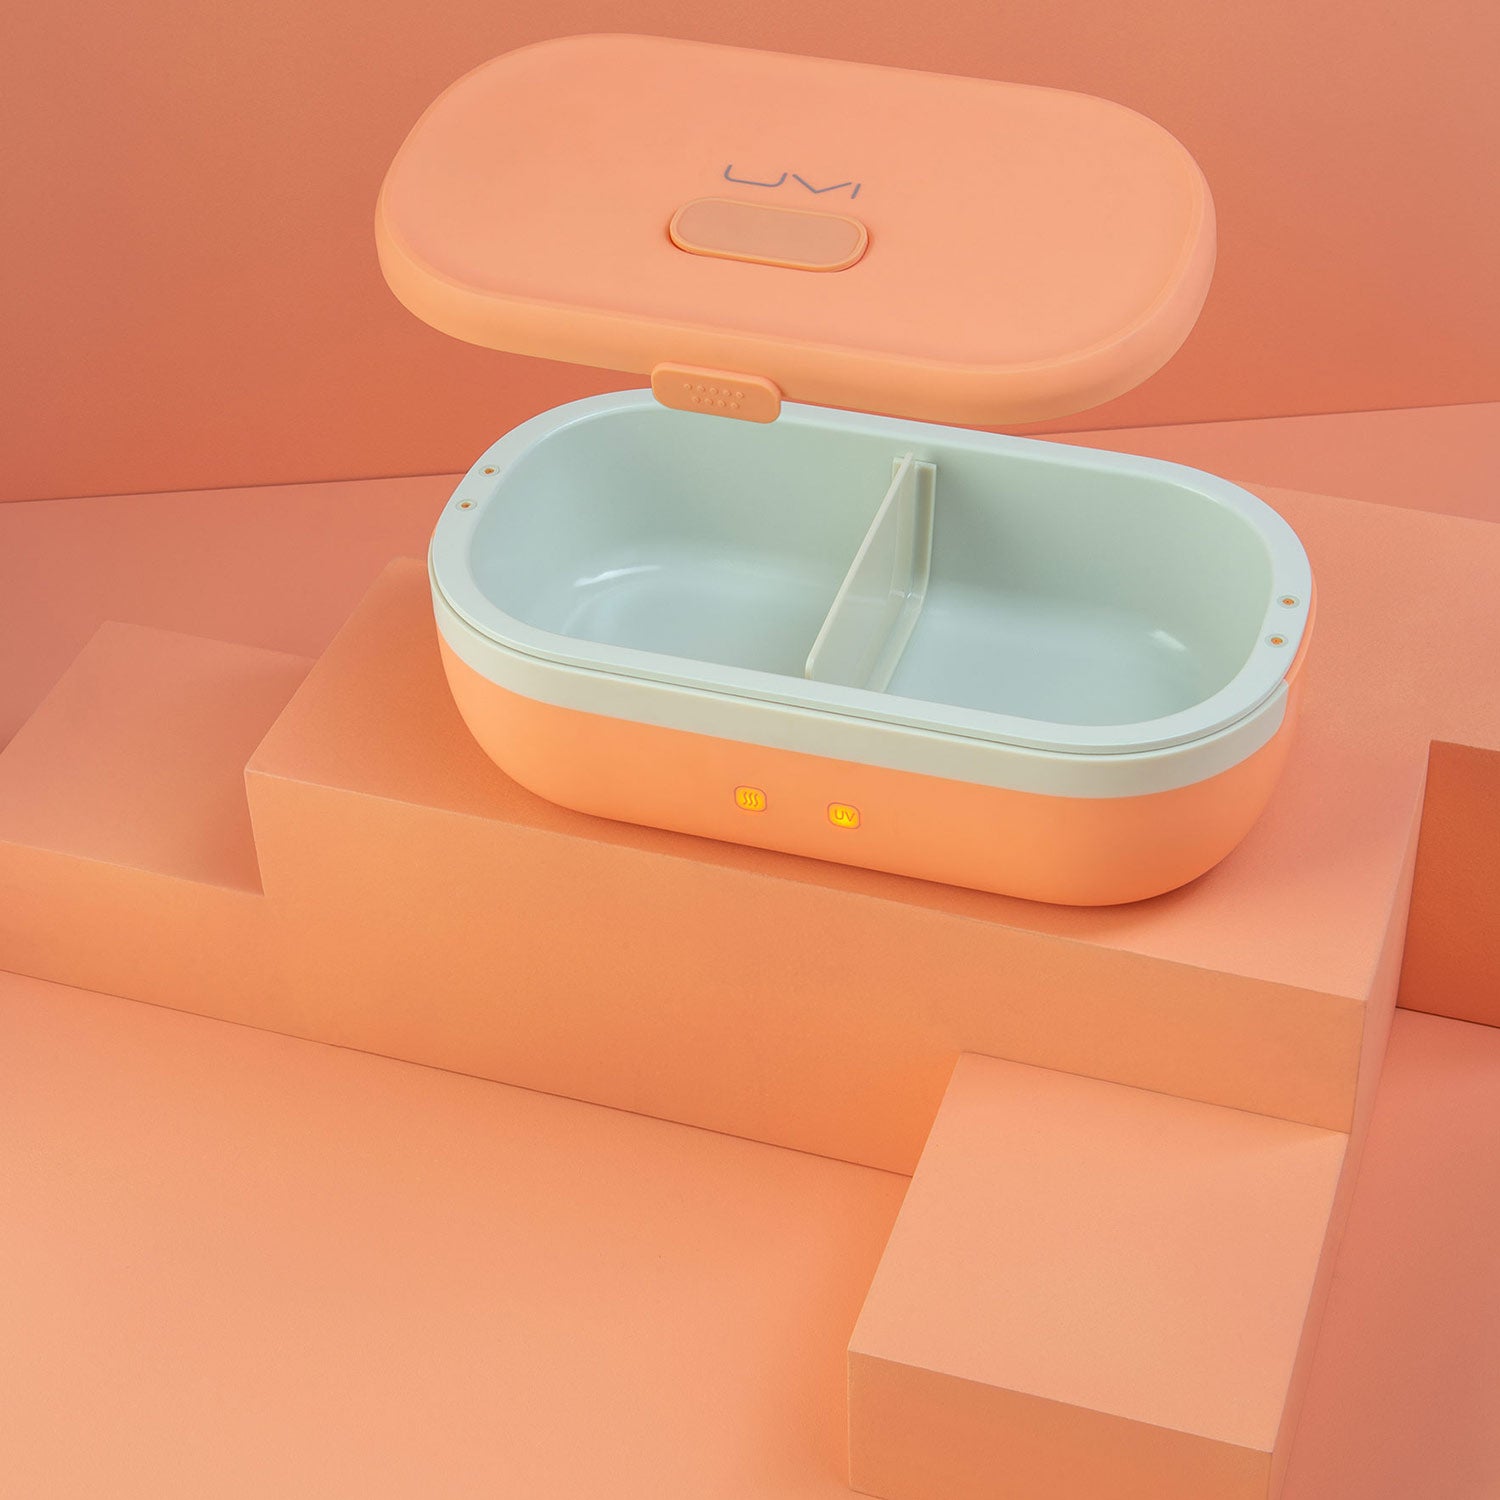 This Self-Heating Lunchbox Is Much Better Than a Microwave